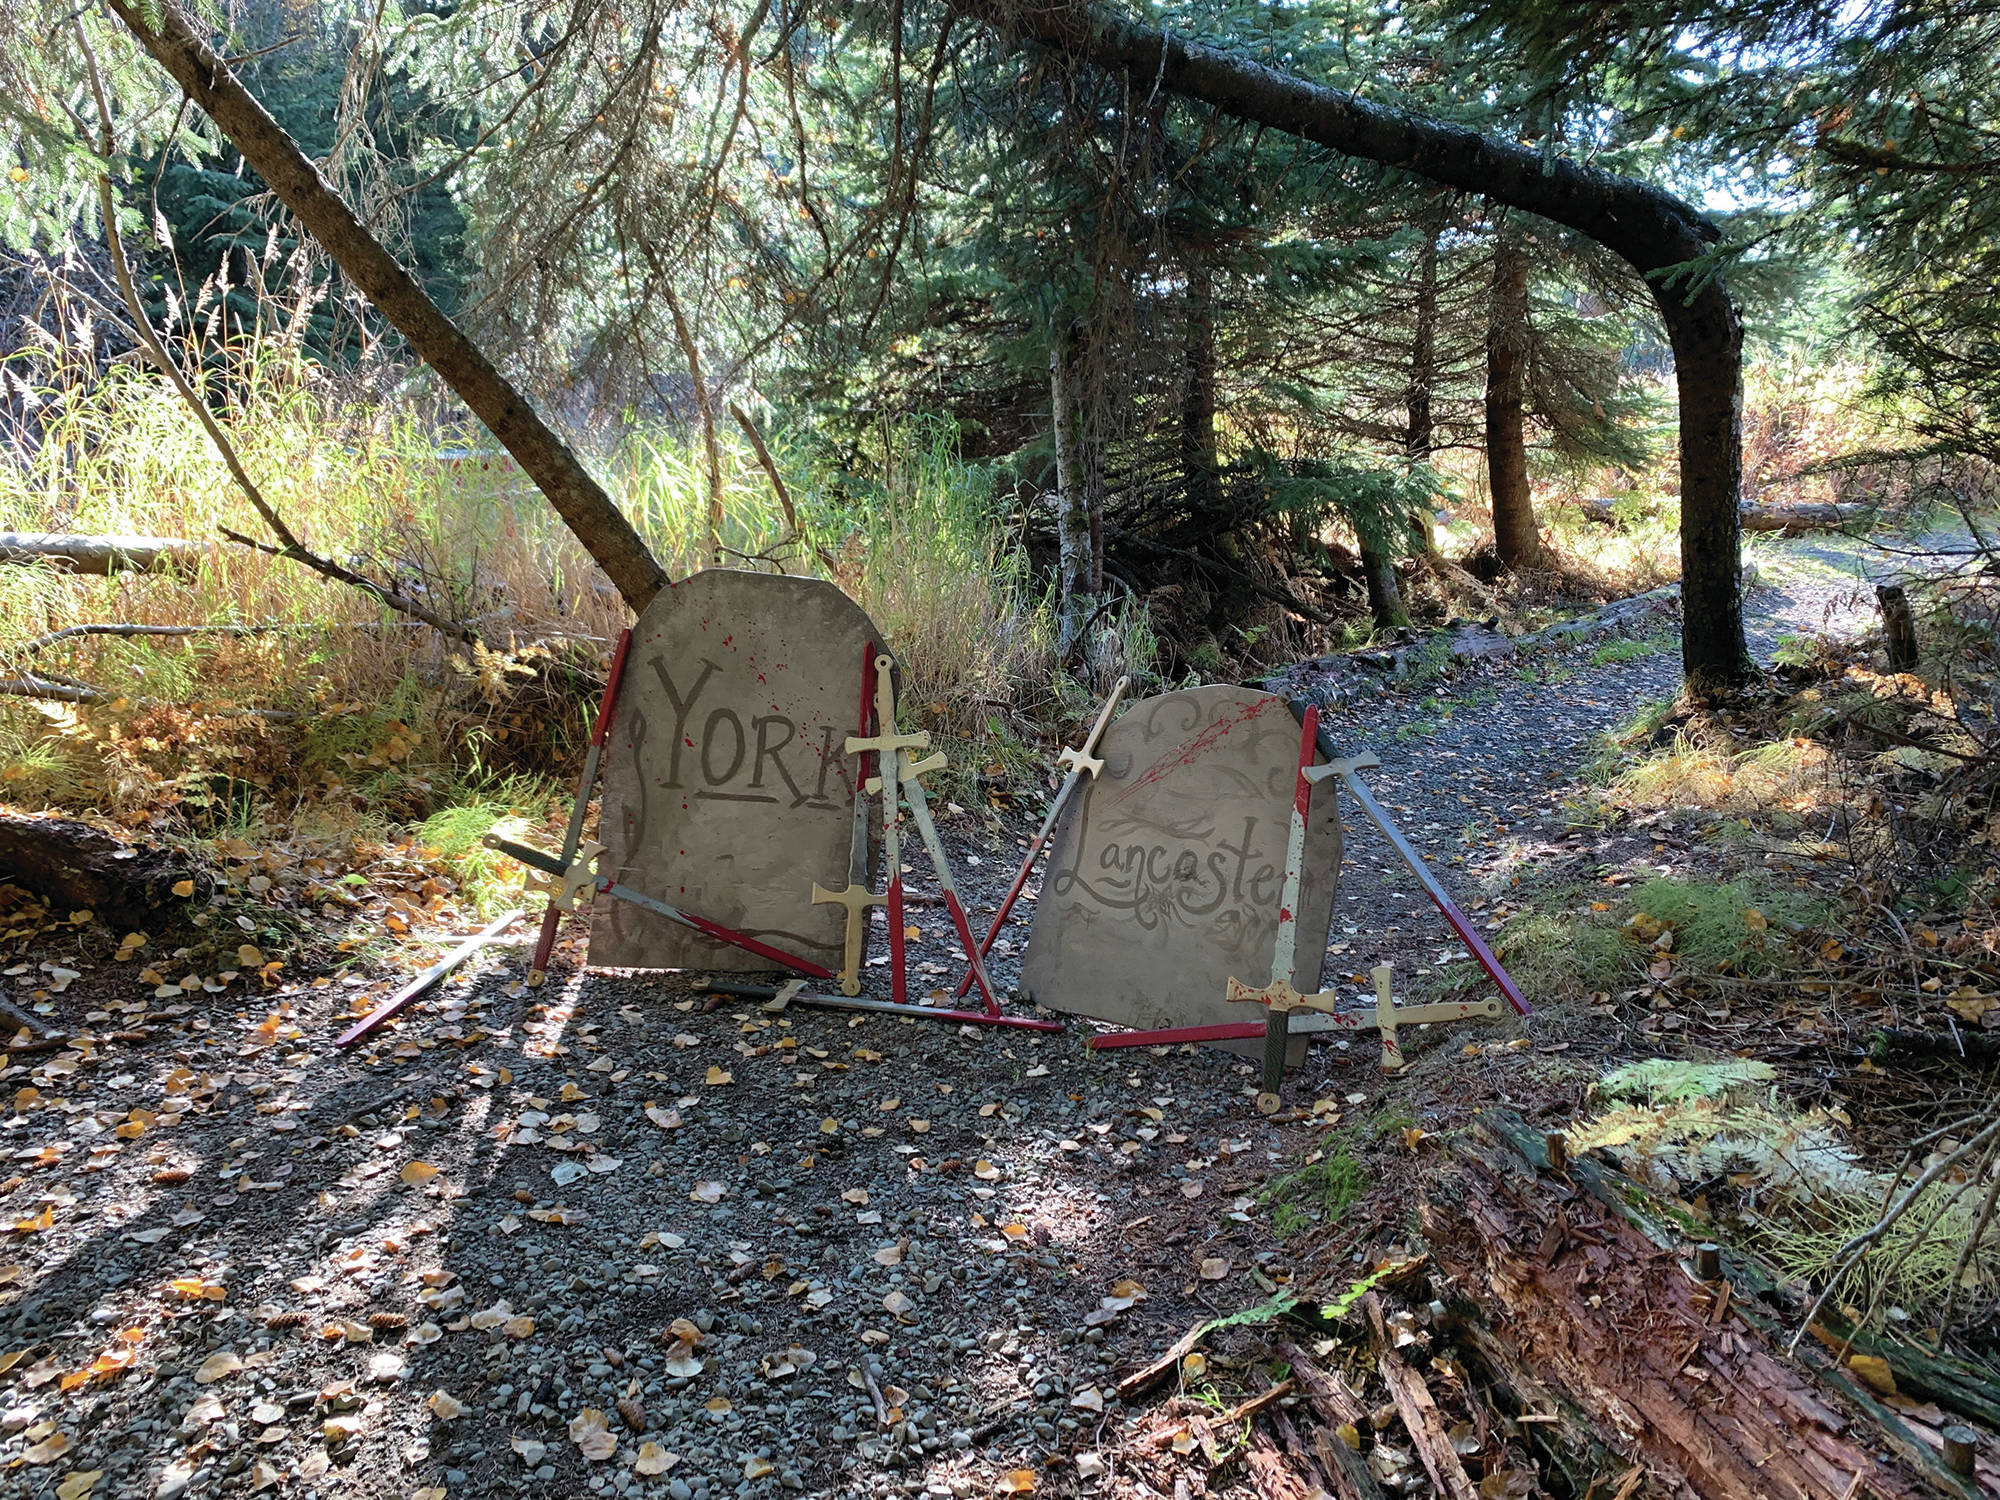 Some props from “Haunted Shakespeare” in a photo taken Oct. 12, 2020, at the Pratt Museum forest trail in Homer, Alaska. (Photo courtesy Pier One Theatre)